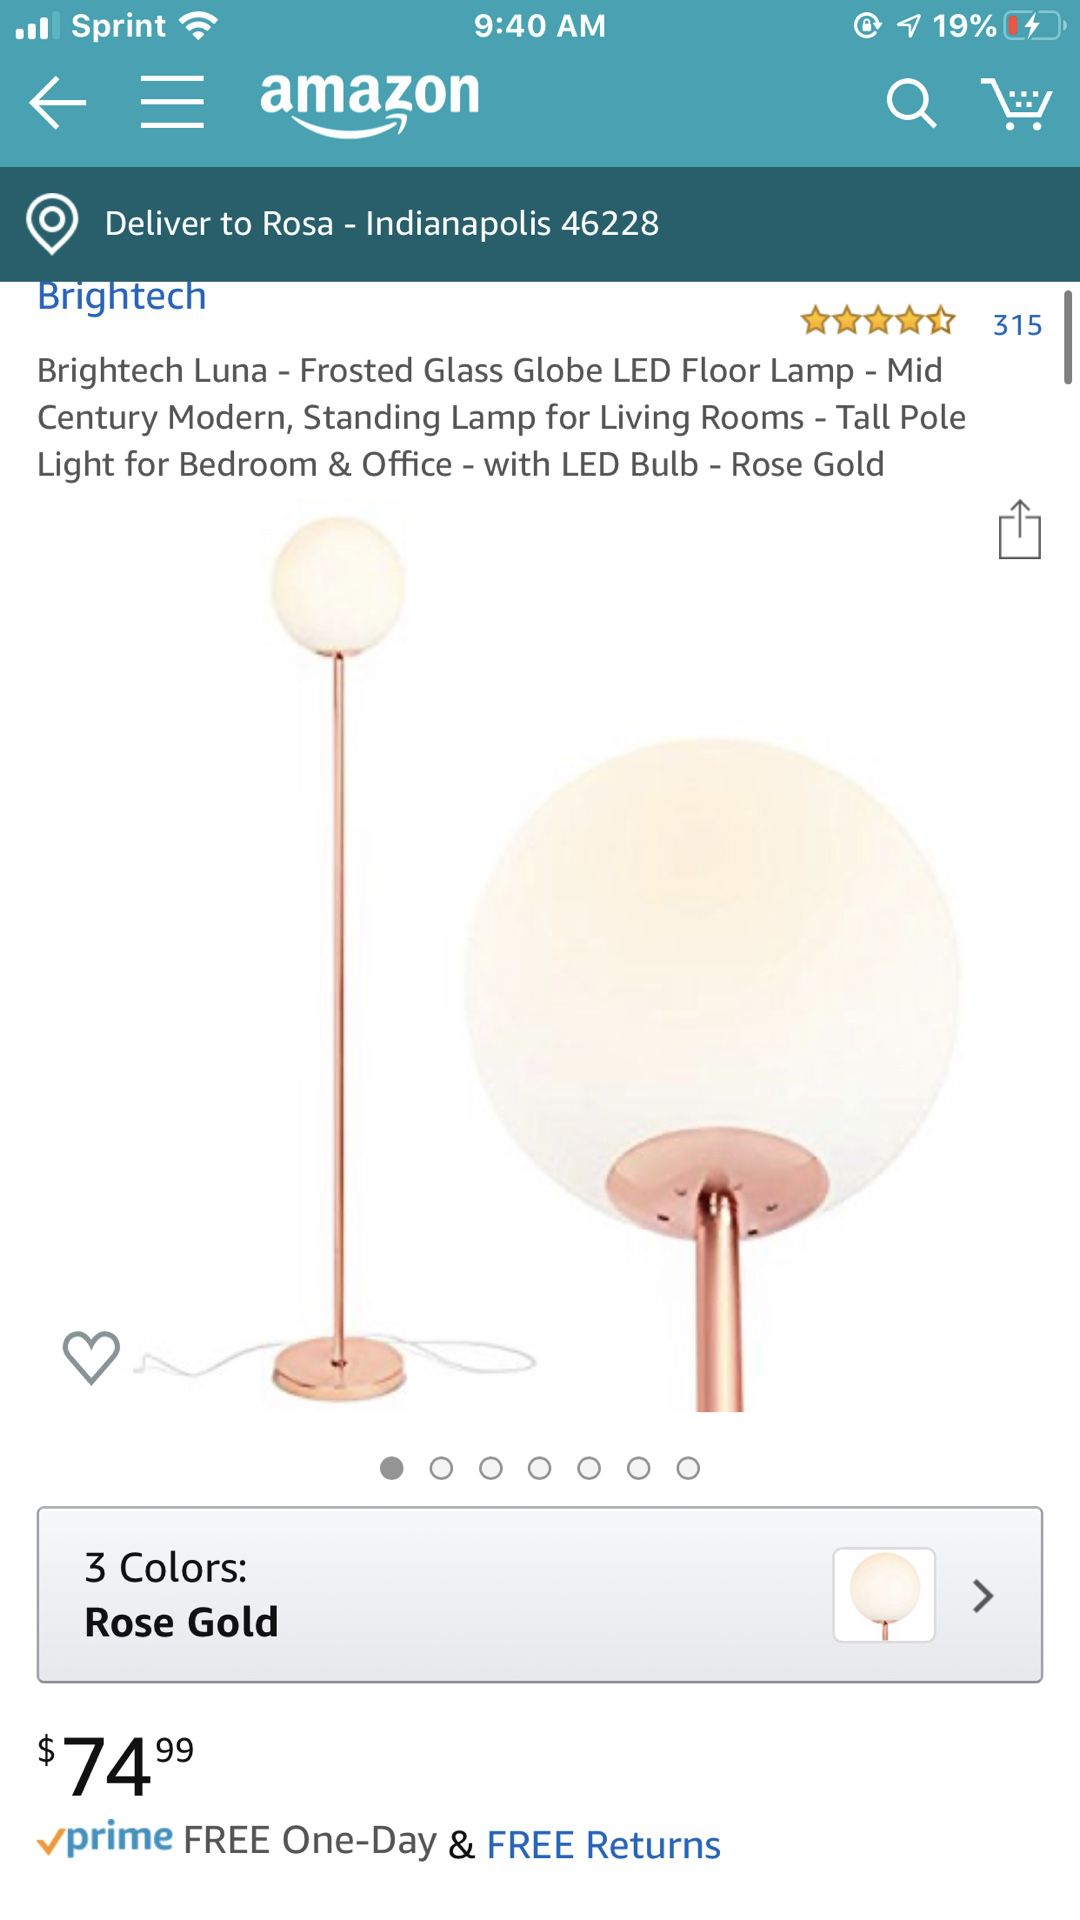 Brightech Luna - Frosted Glass Globe LED Floor Lamp - Mid Century Modern, Standing Lamp w LED bulb